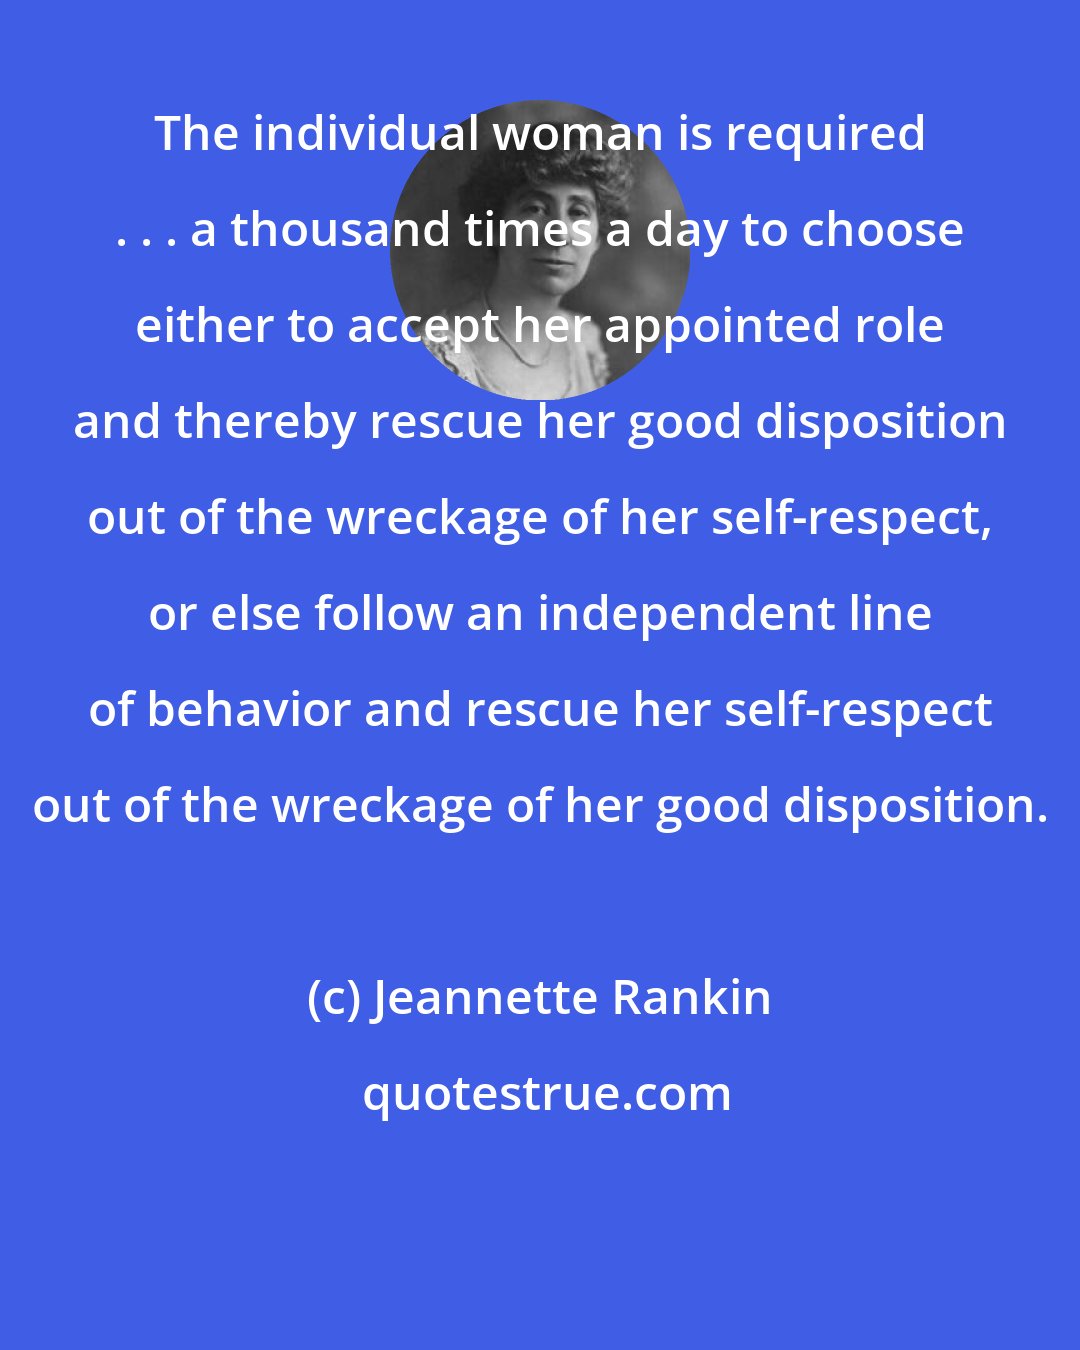 Jeannette Rankin: The individual woman is required . . . a thousand times a day to choose either to accept her appointed role and thereby rescue her good disposition out of the wreckage of her self-respect, or else follow an independent line of behavior and rescue her self-respect out of the wreckage of her good disposition.